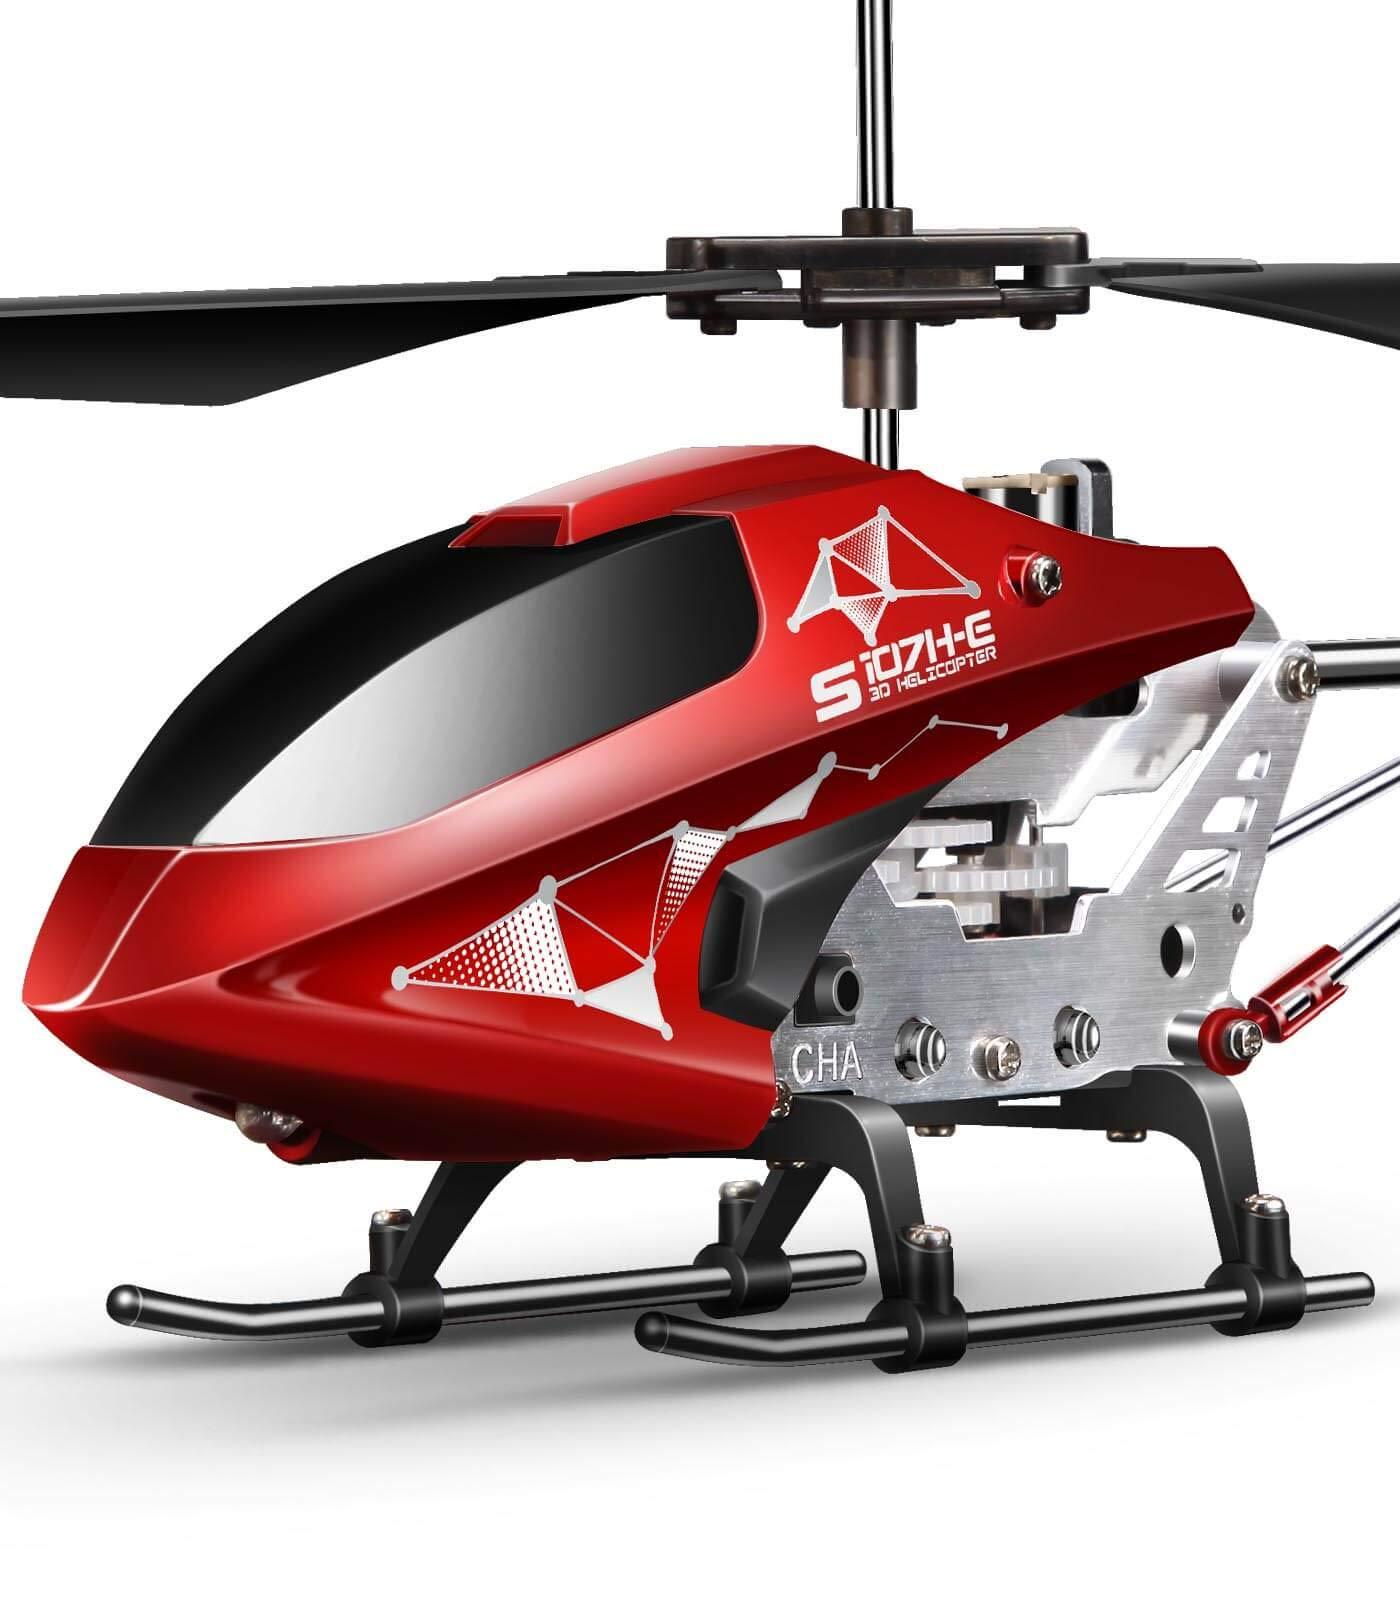 Remote Control Helicopter Below 100: Top affordable remote control helicopters under $100